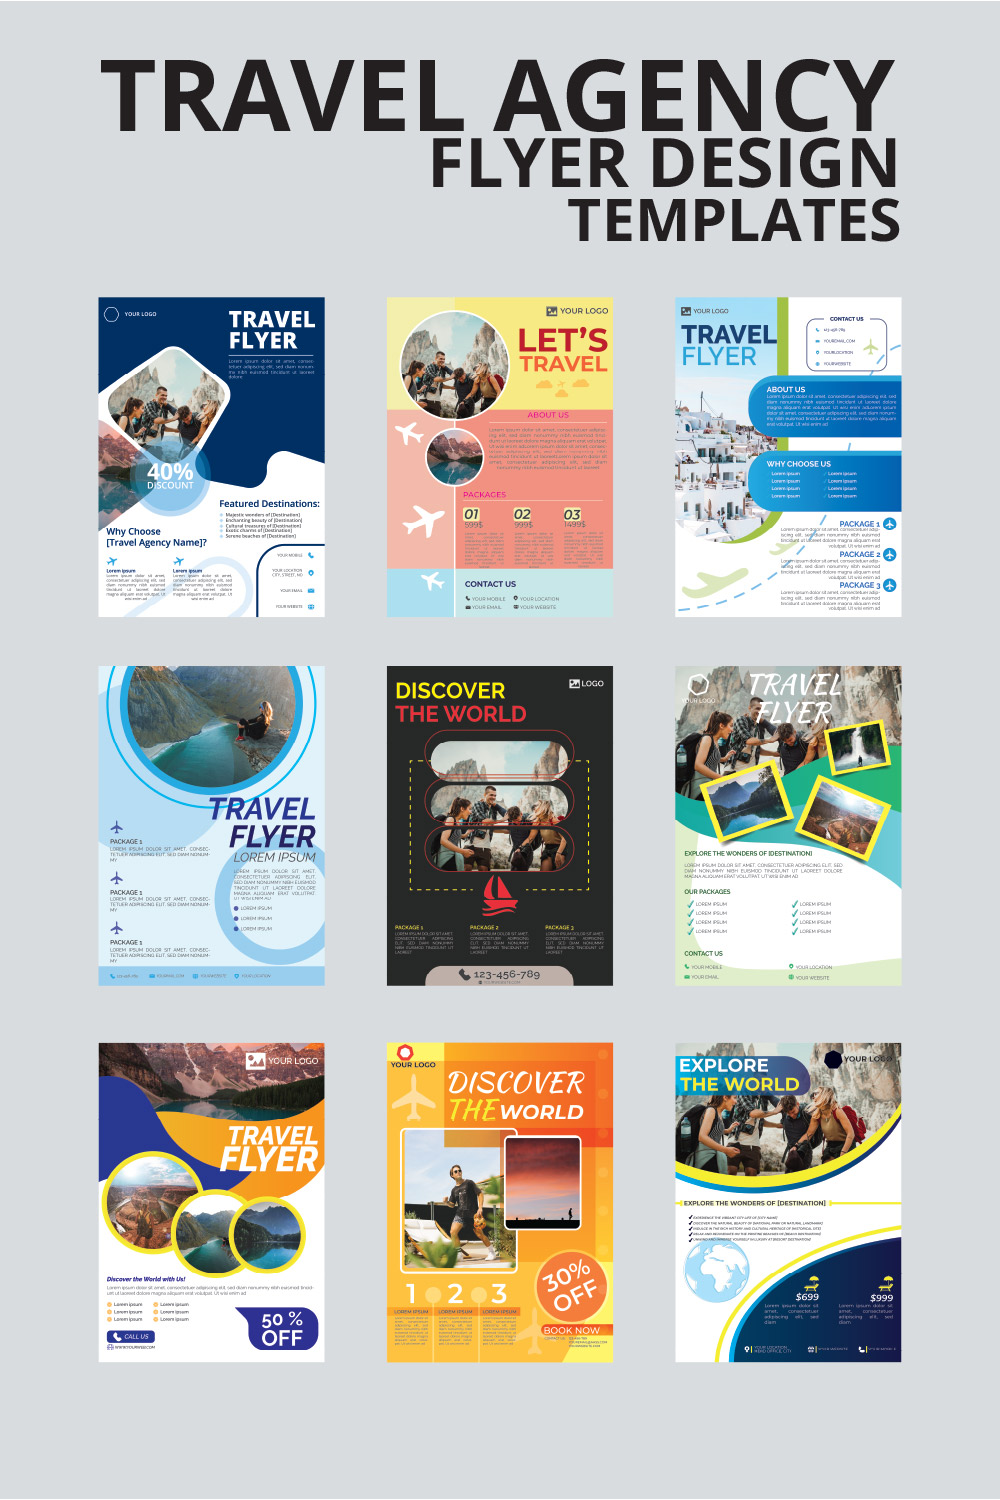 Travel agency flyer design templates pinterest preview image.